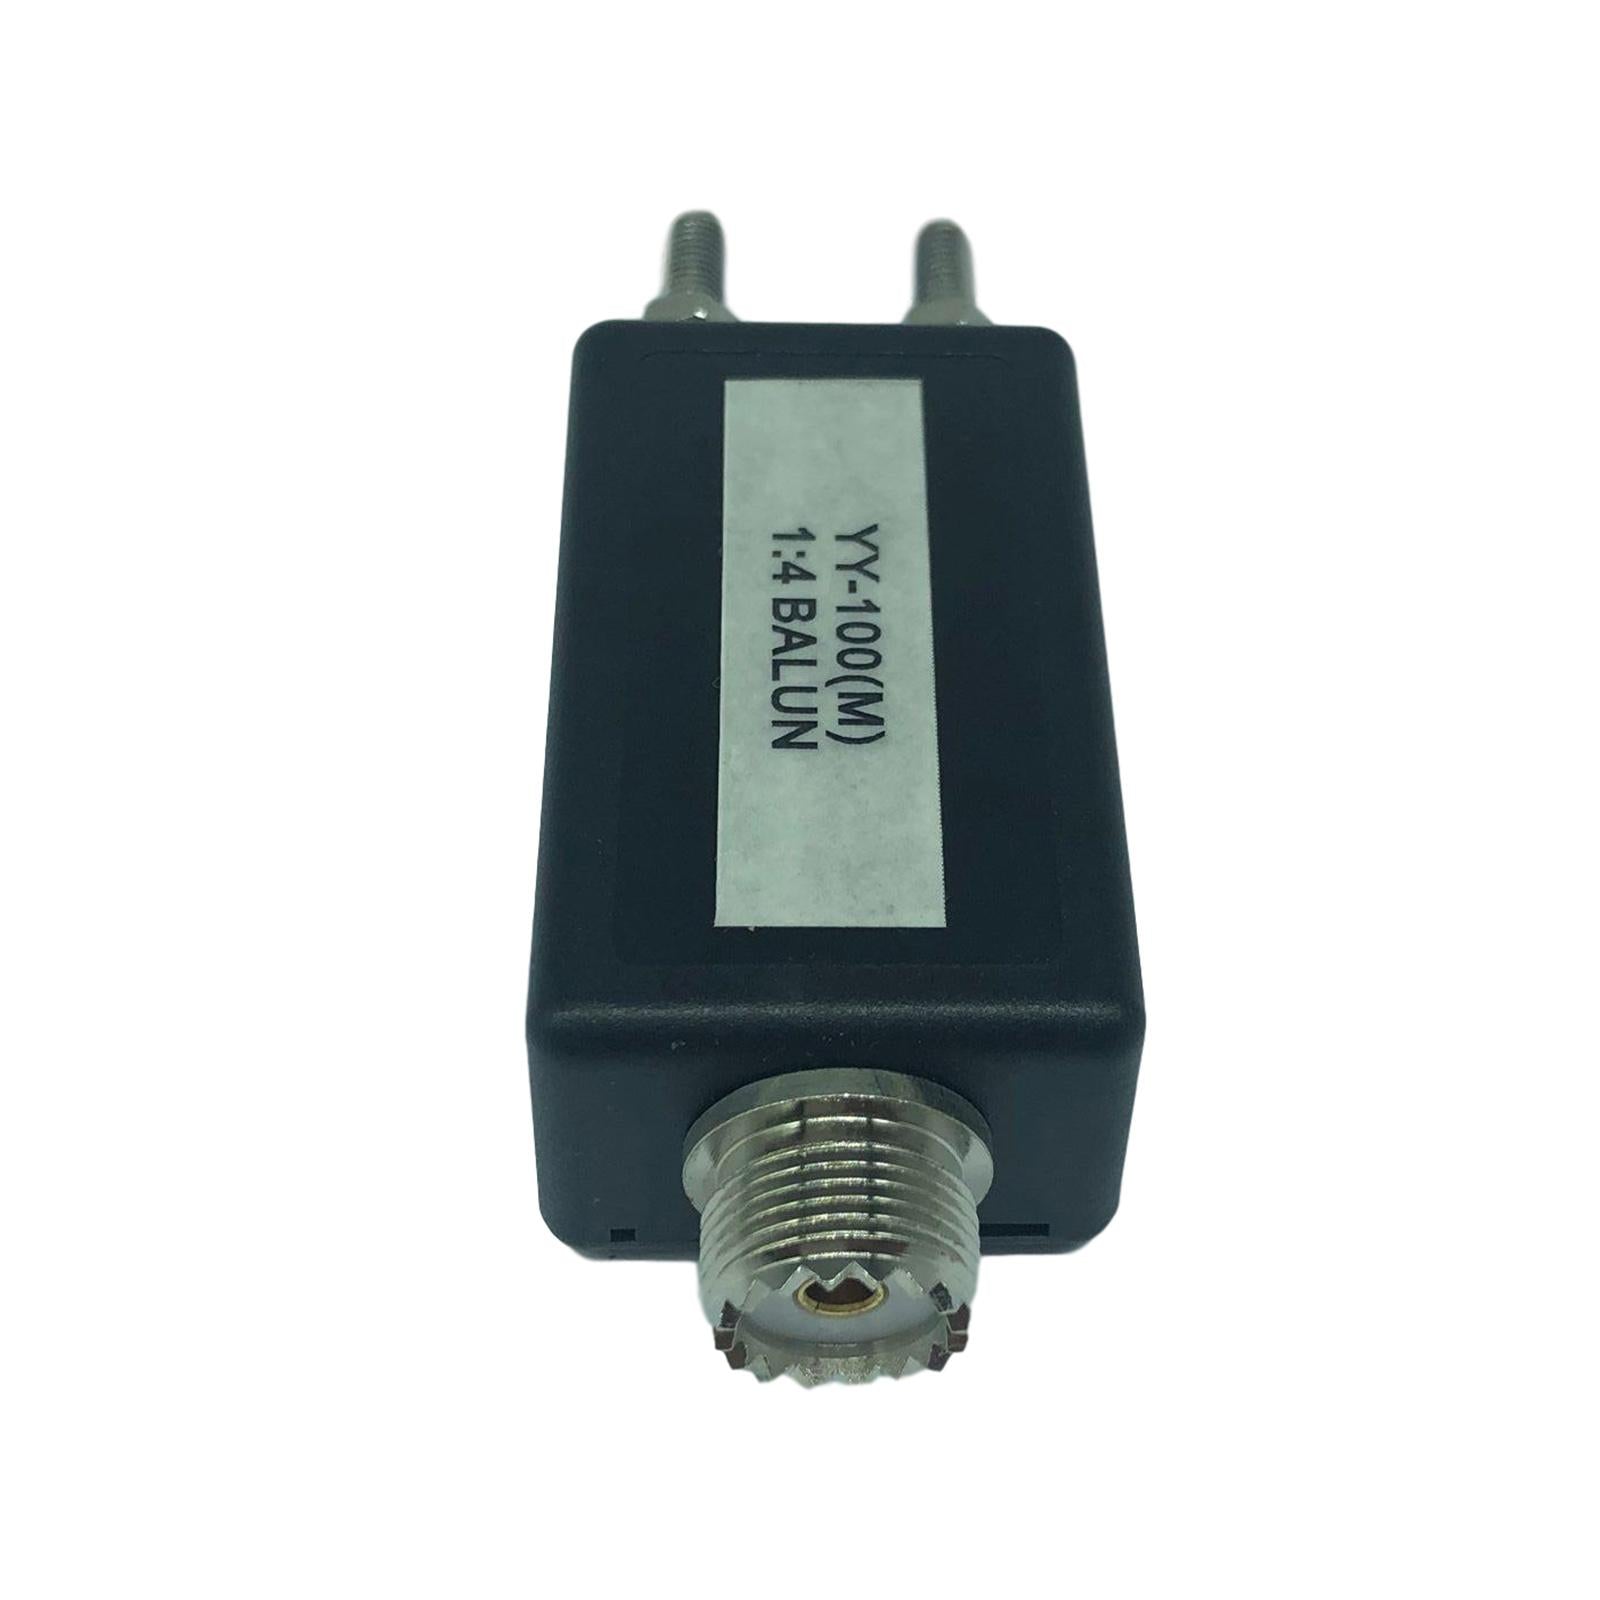 Metal 1:4 Balun Portable 3-30MHz 100W for Software Defined Radio Outdoor